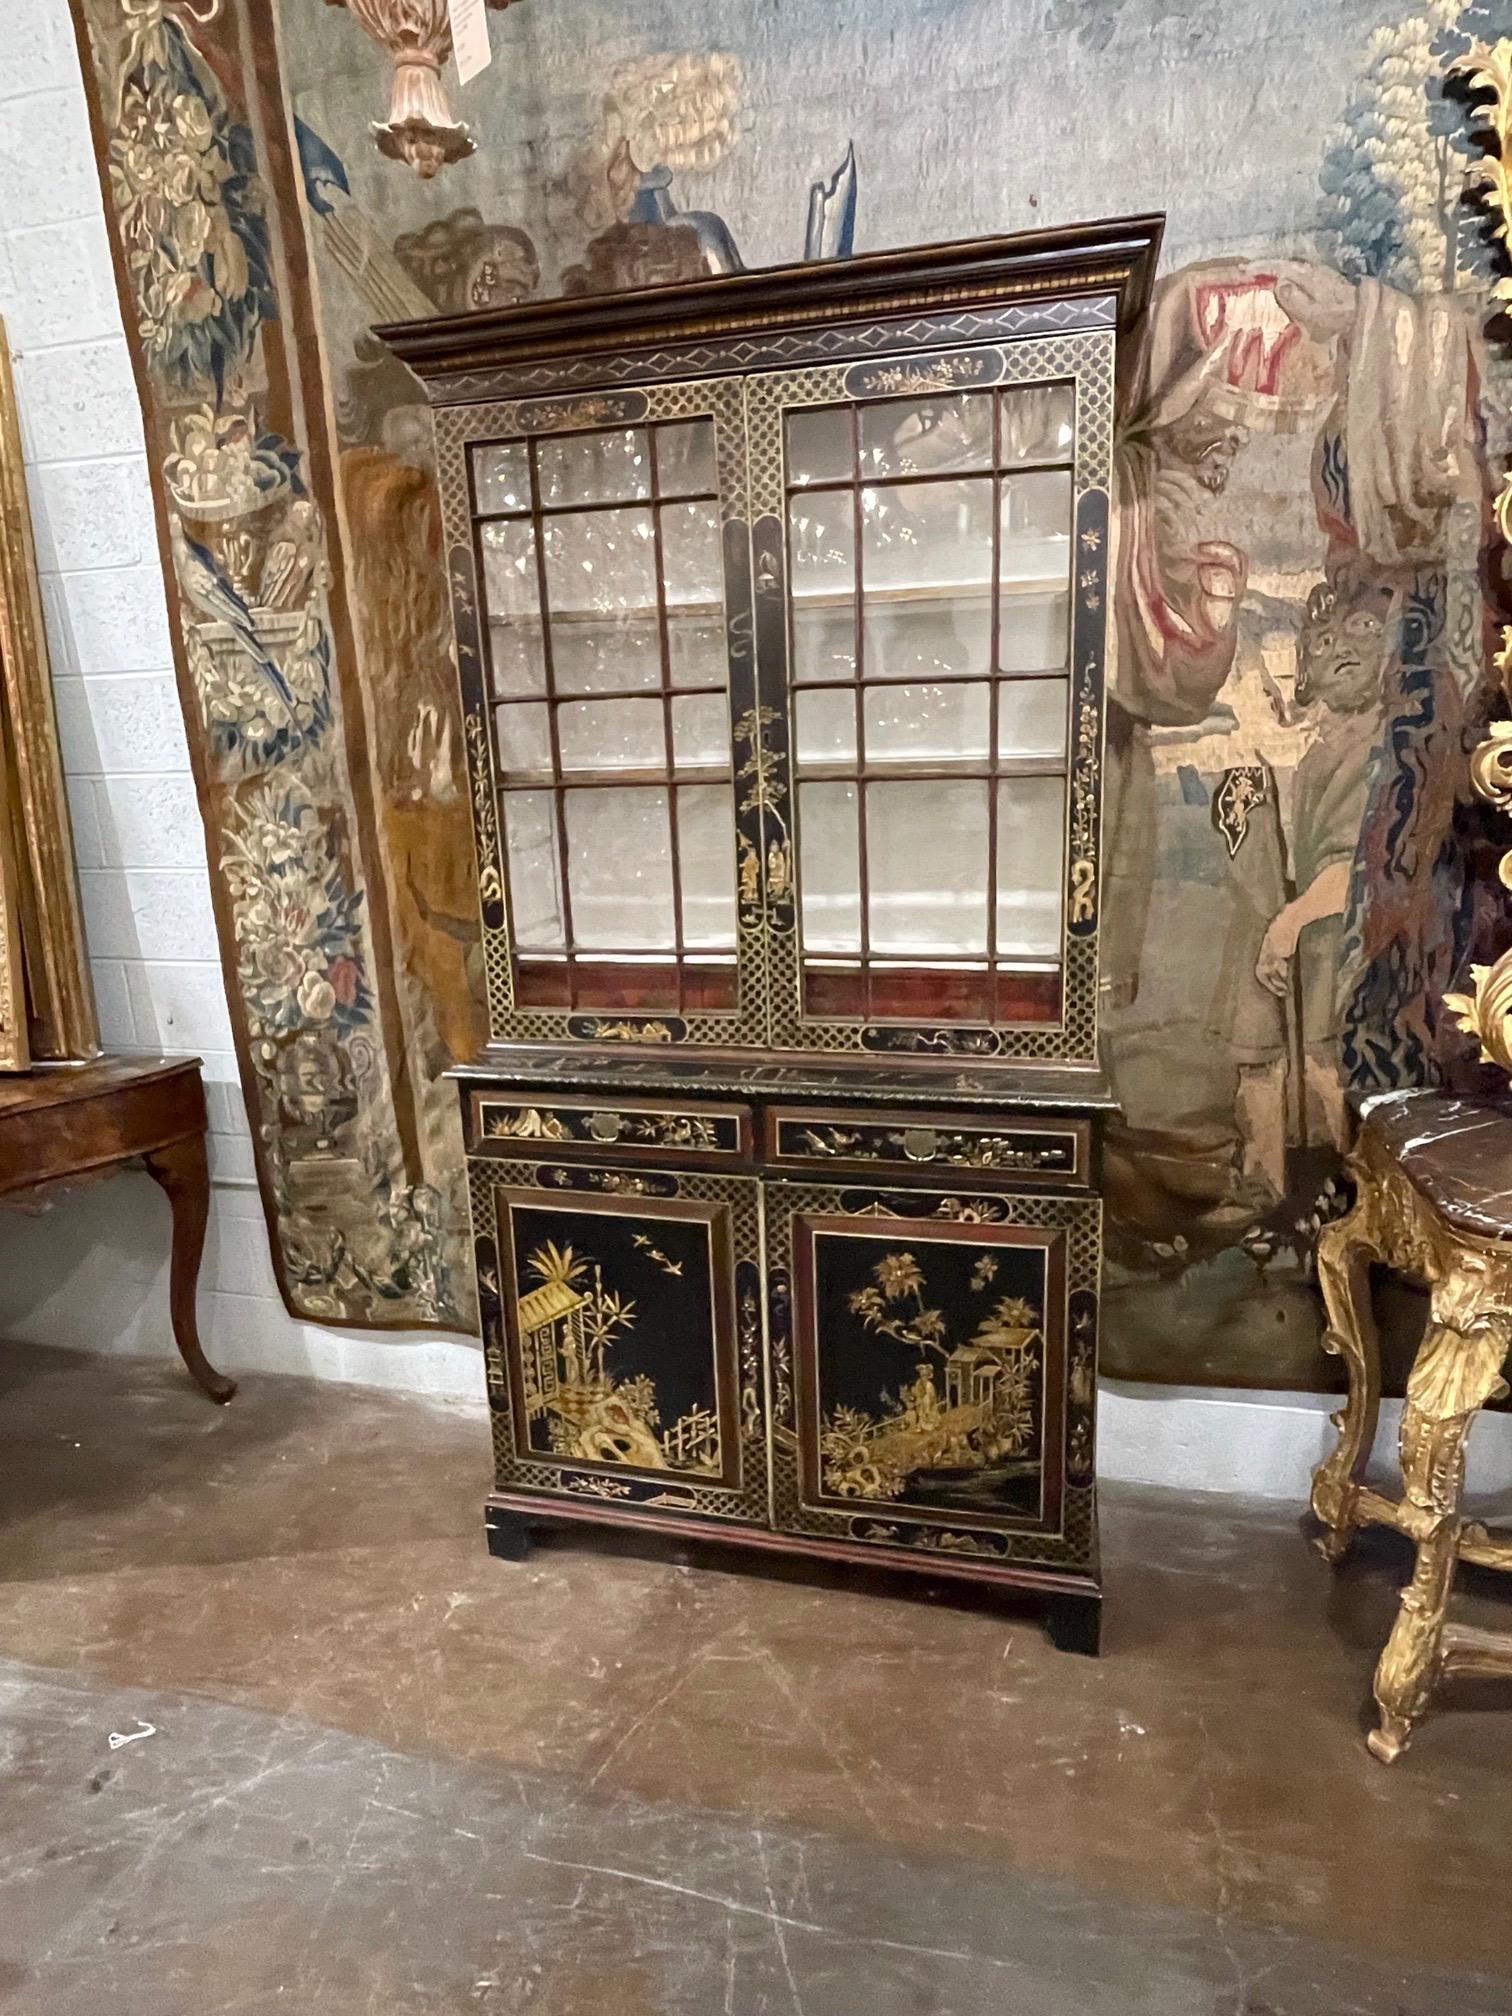 Beautiful decorative 19th century black lacquered bookcase with raised Chinoiserie design. Features interesting Asian designs. A true work of art!